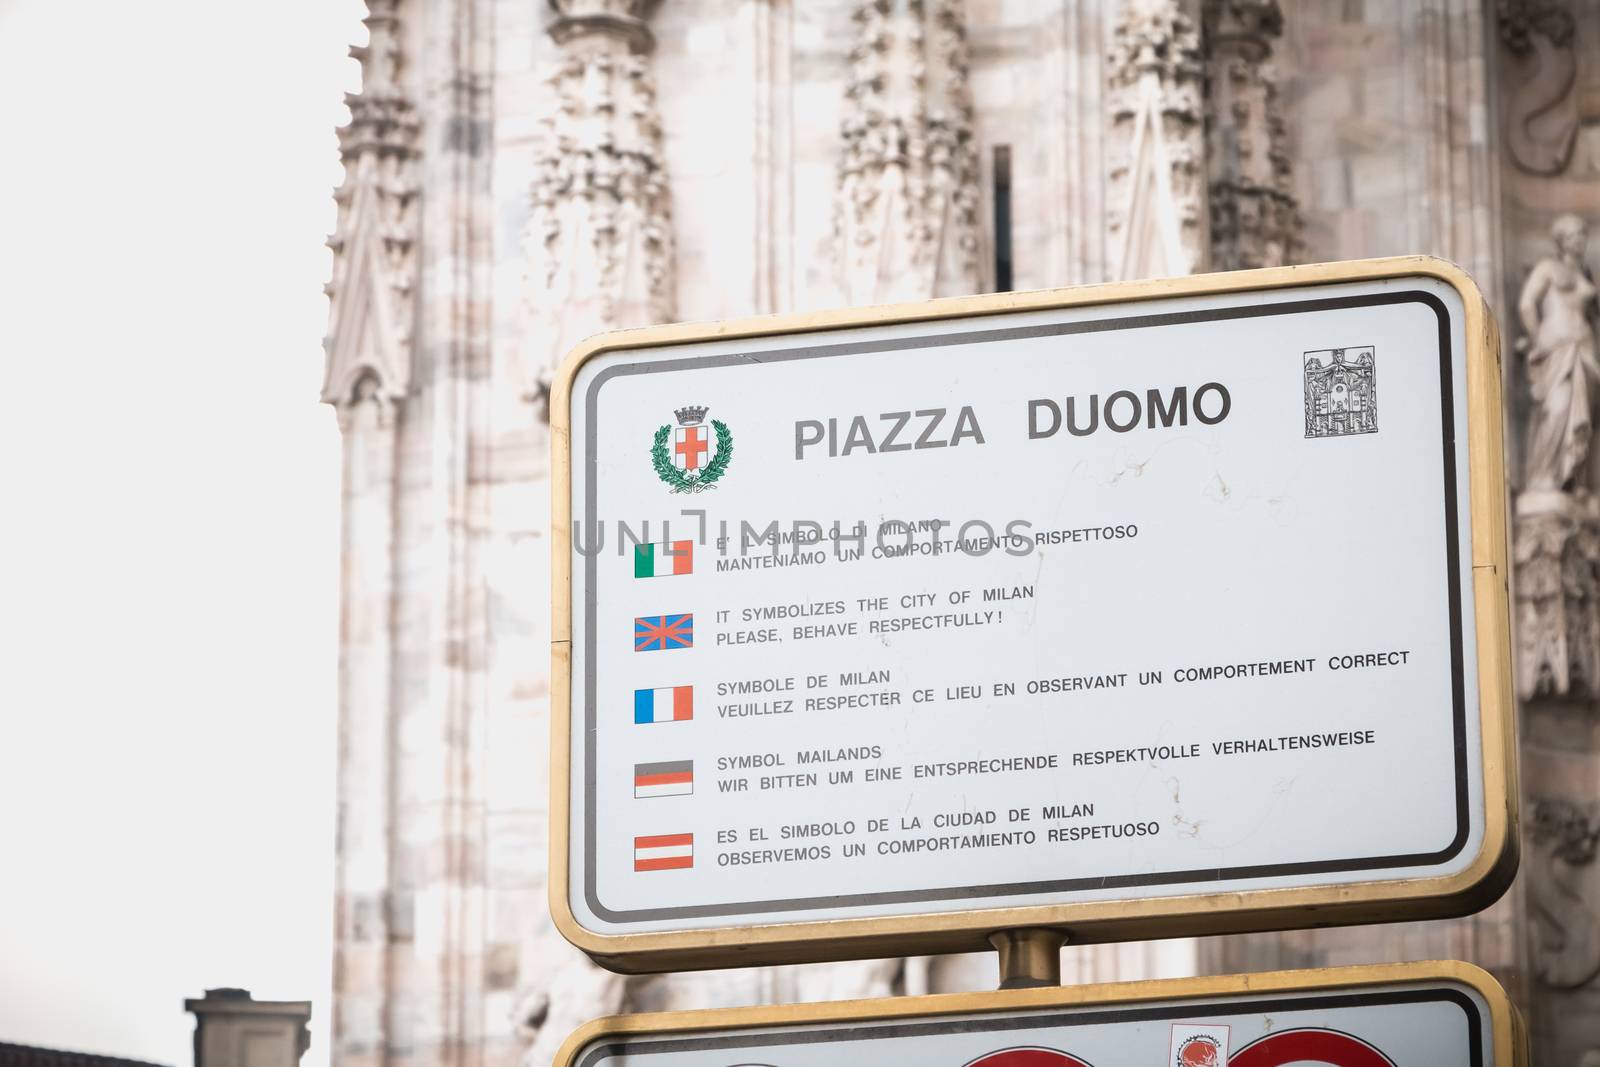 Duomo Square, a sign asks visitors to respect the place by obser by AtlanticEUROSTOXX